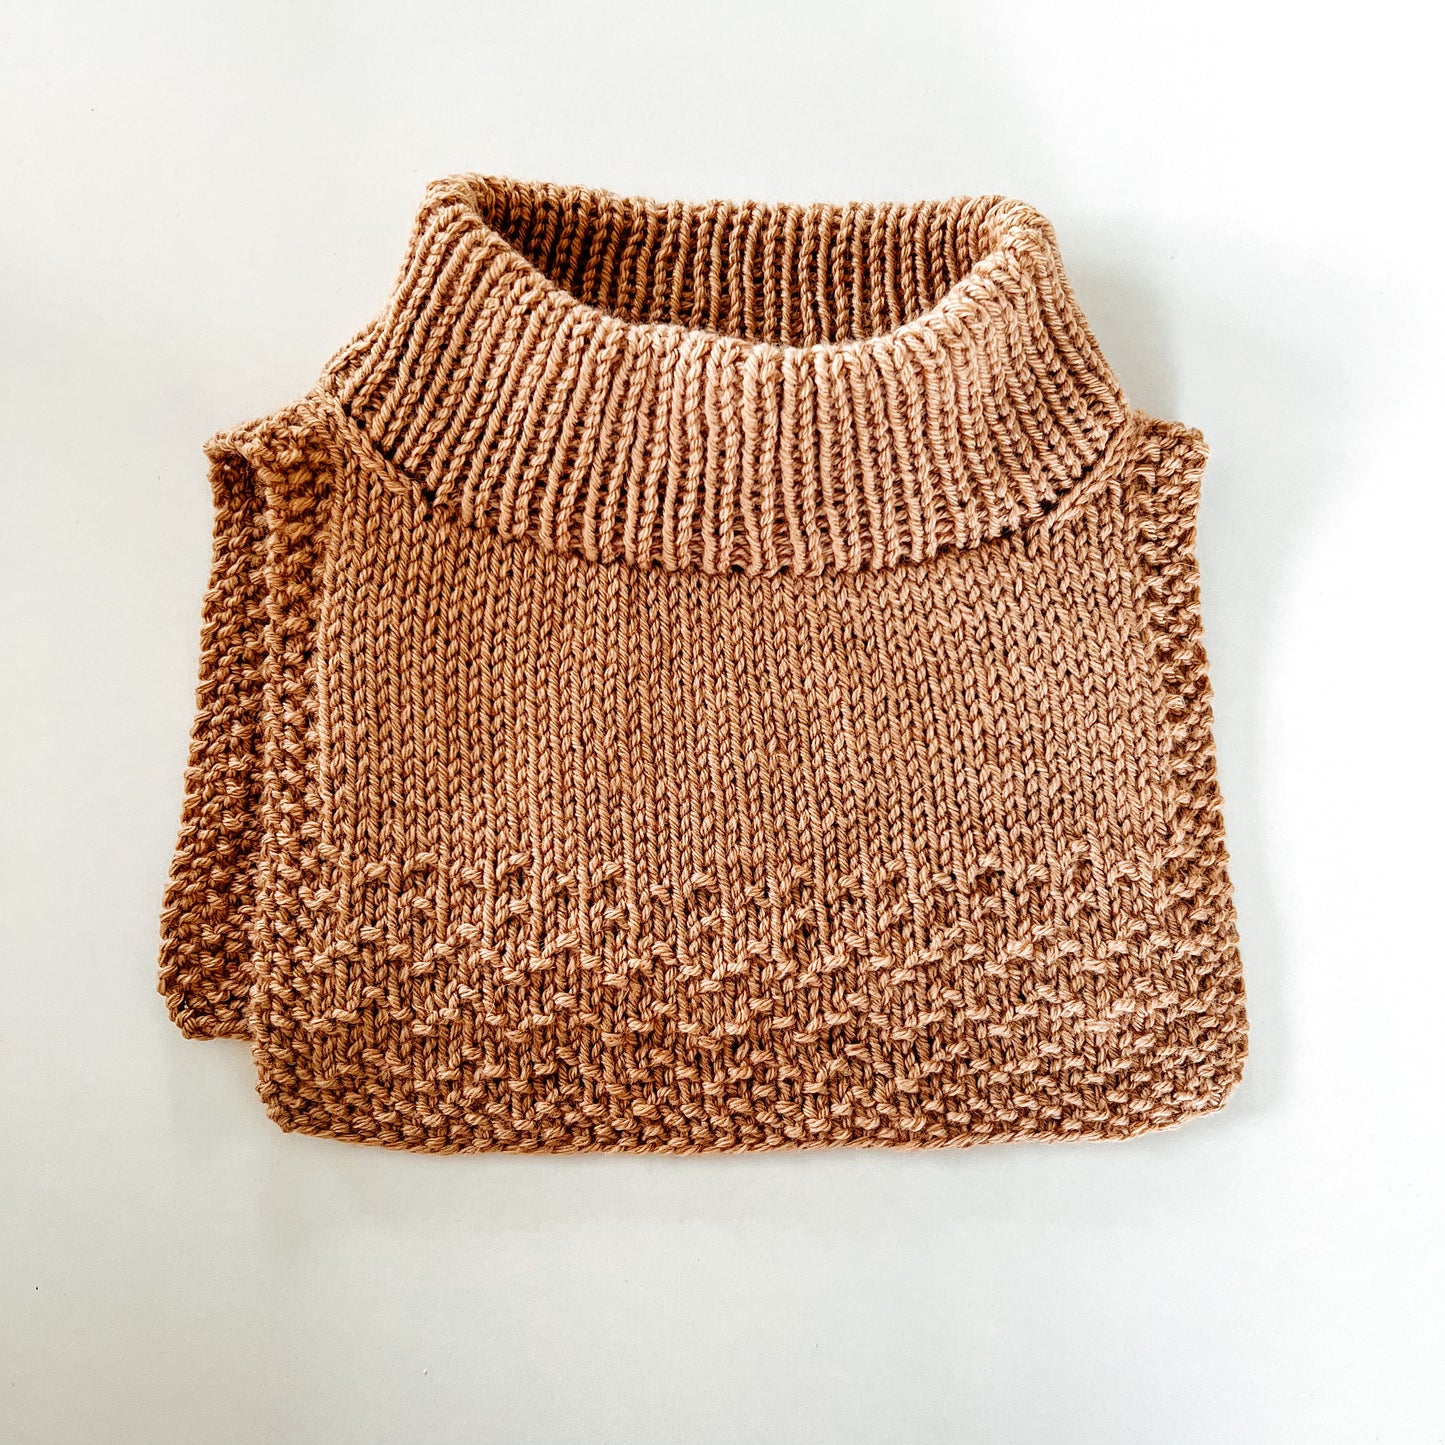 Pernille´s moss cowl